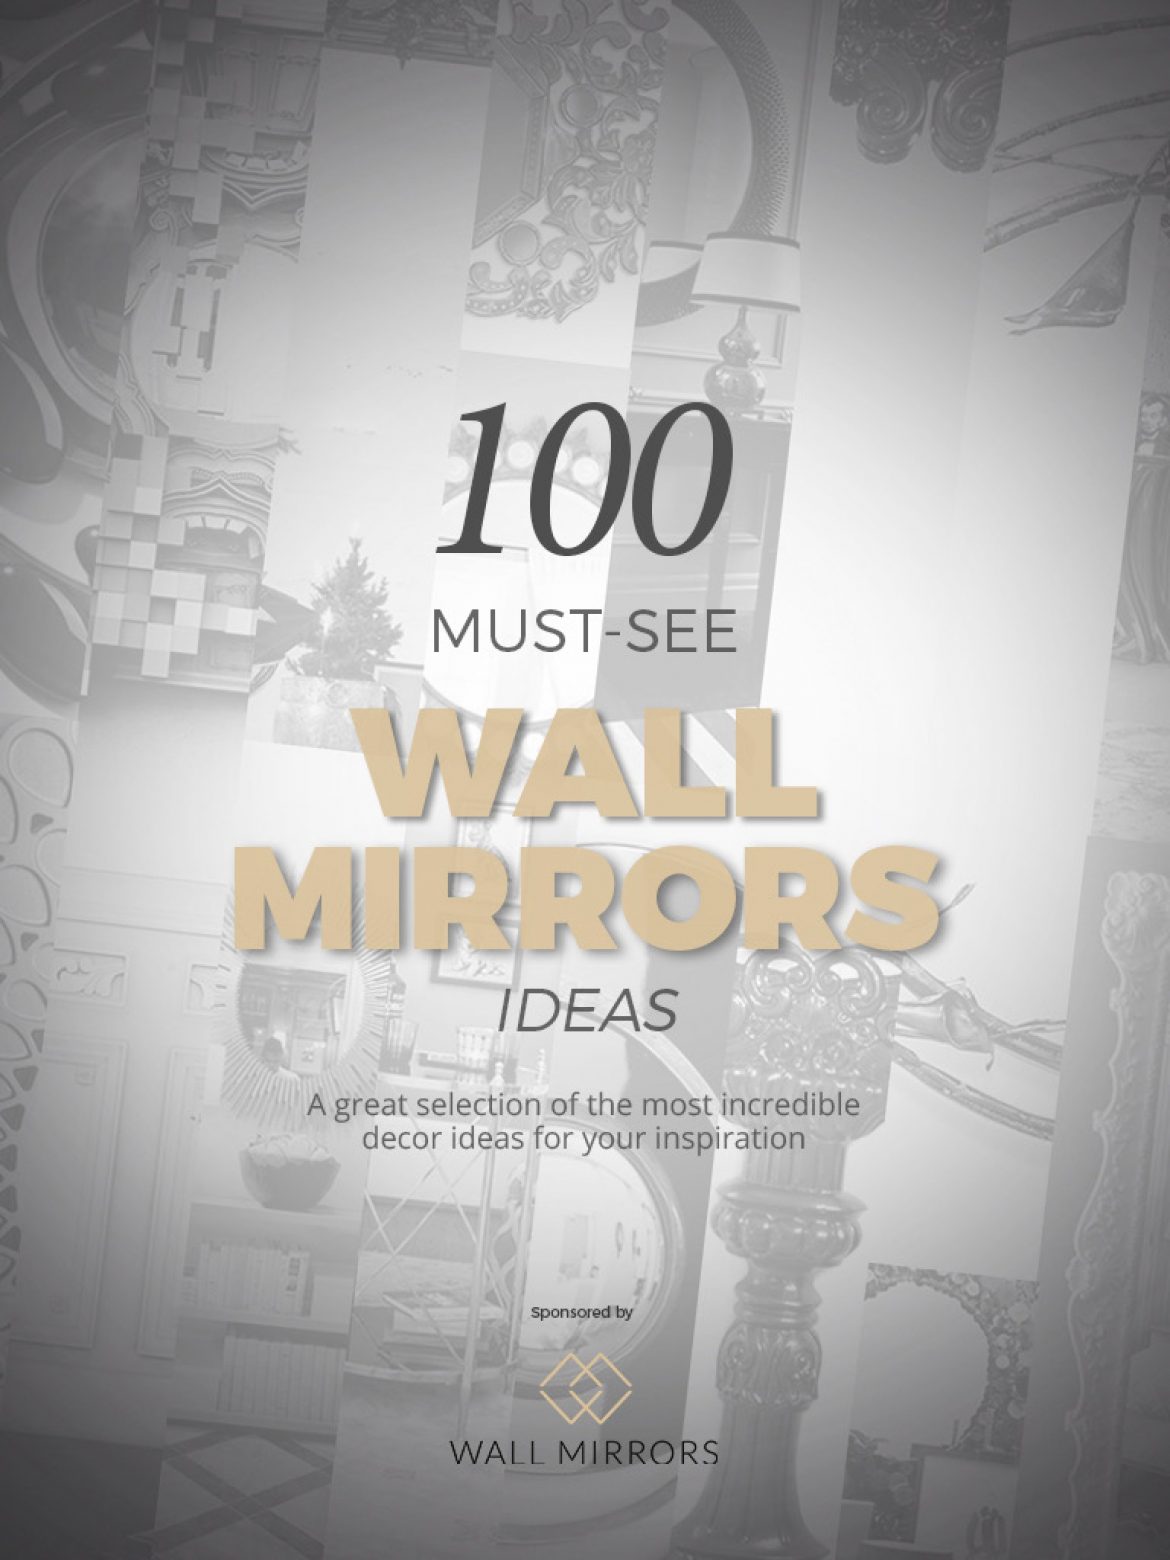 Explore The Unique 100 Must-see Wall Mirrors Ebook ➤To see more interior design ideas and the best shops visit us at http://interiordesignshop.net #interiordesign #salonedelmobile #isaloni @interiordesignshop